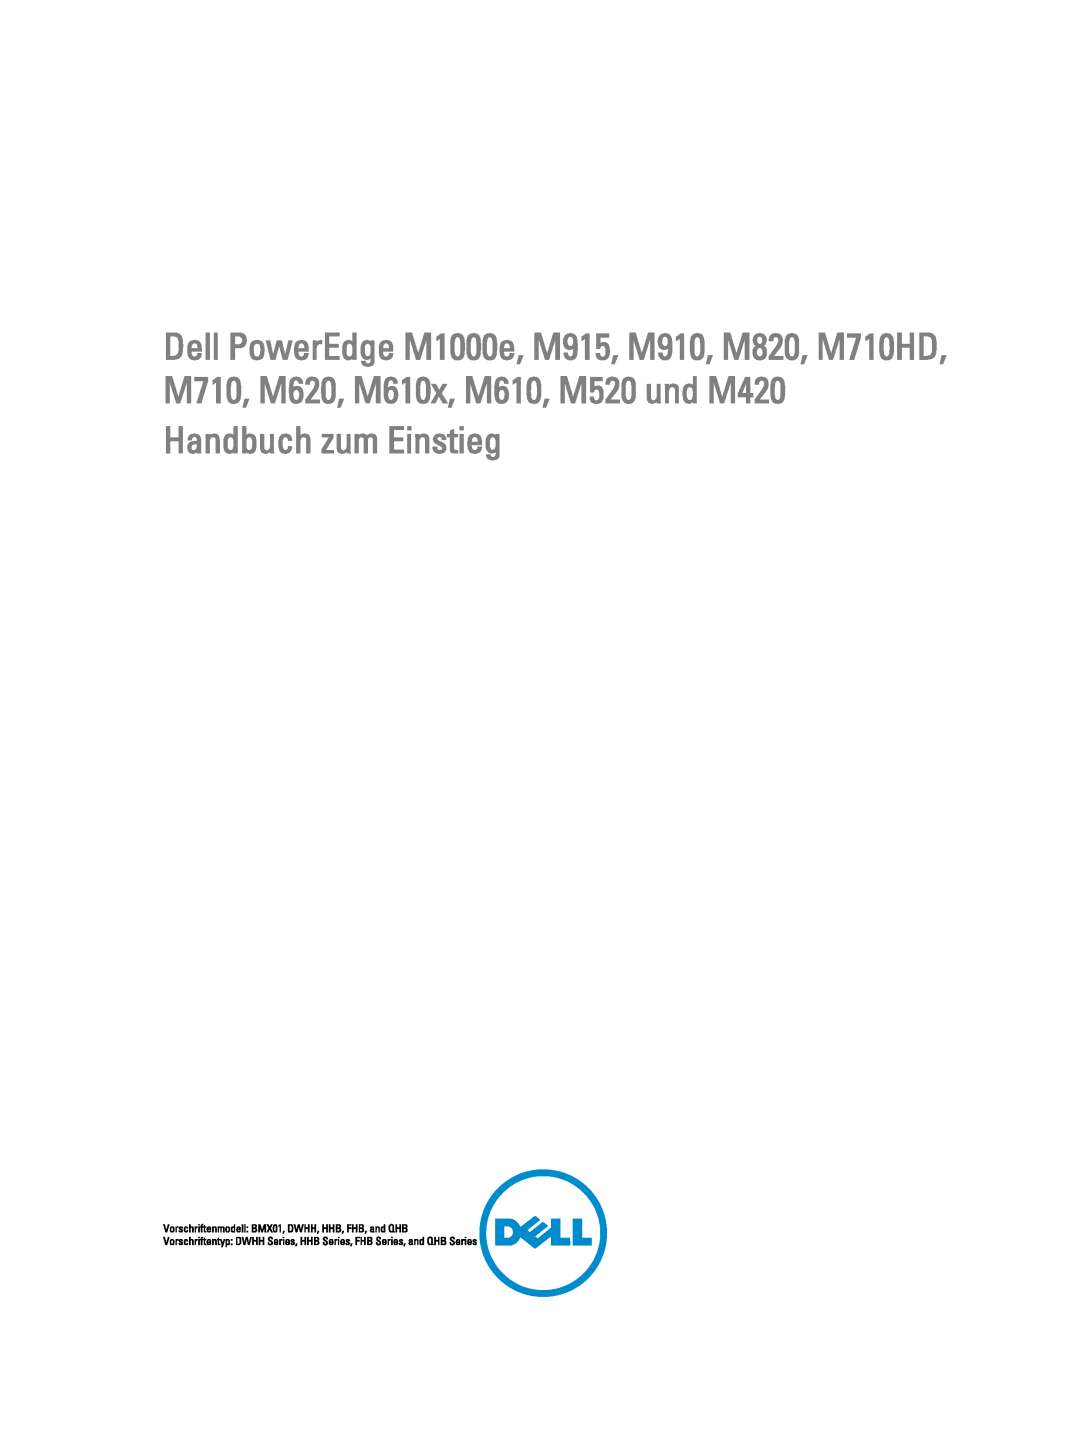 Dell owner manual Dell PowerEdge M915 System Memory- Information Update 